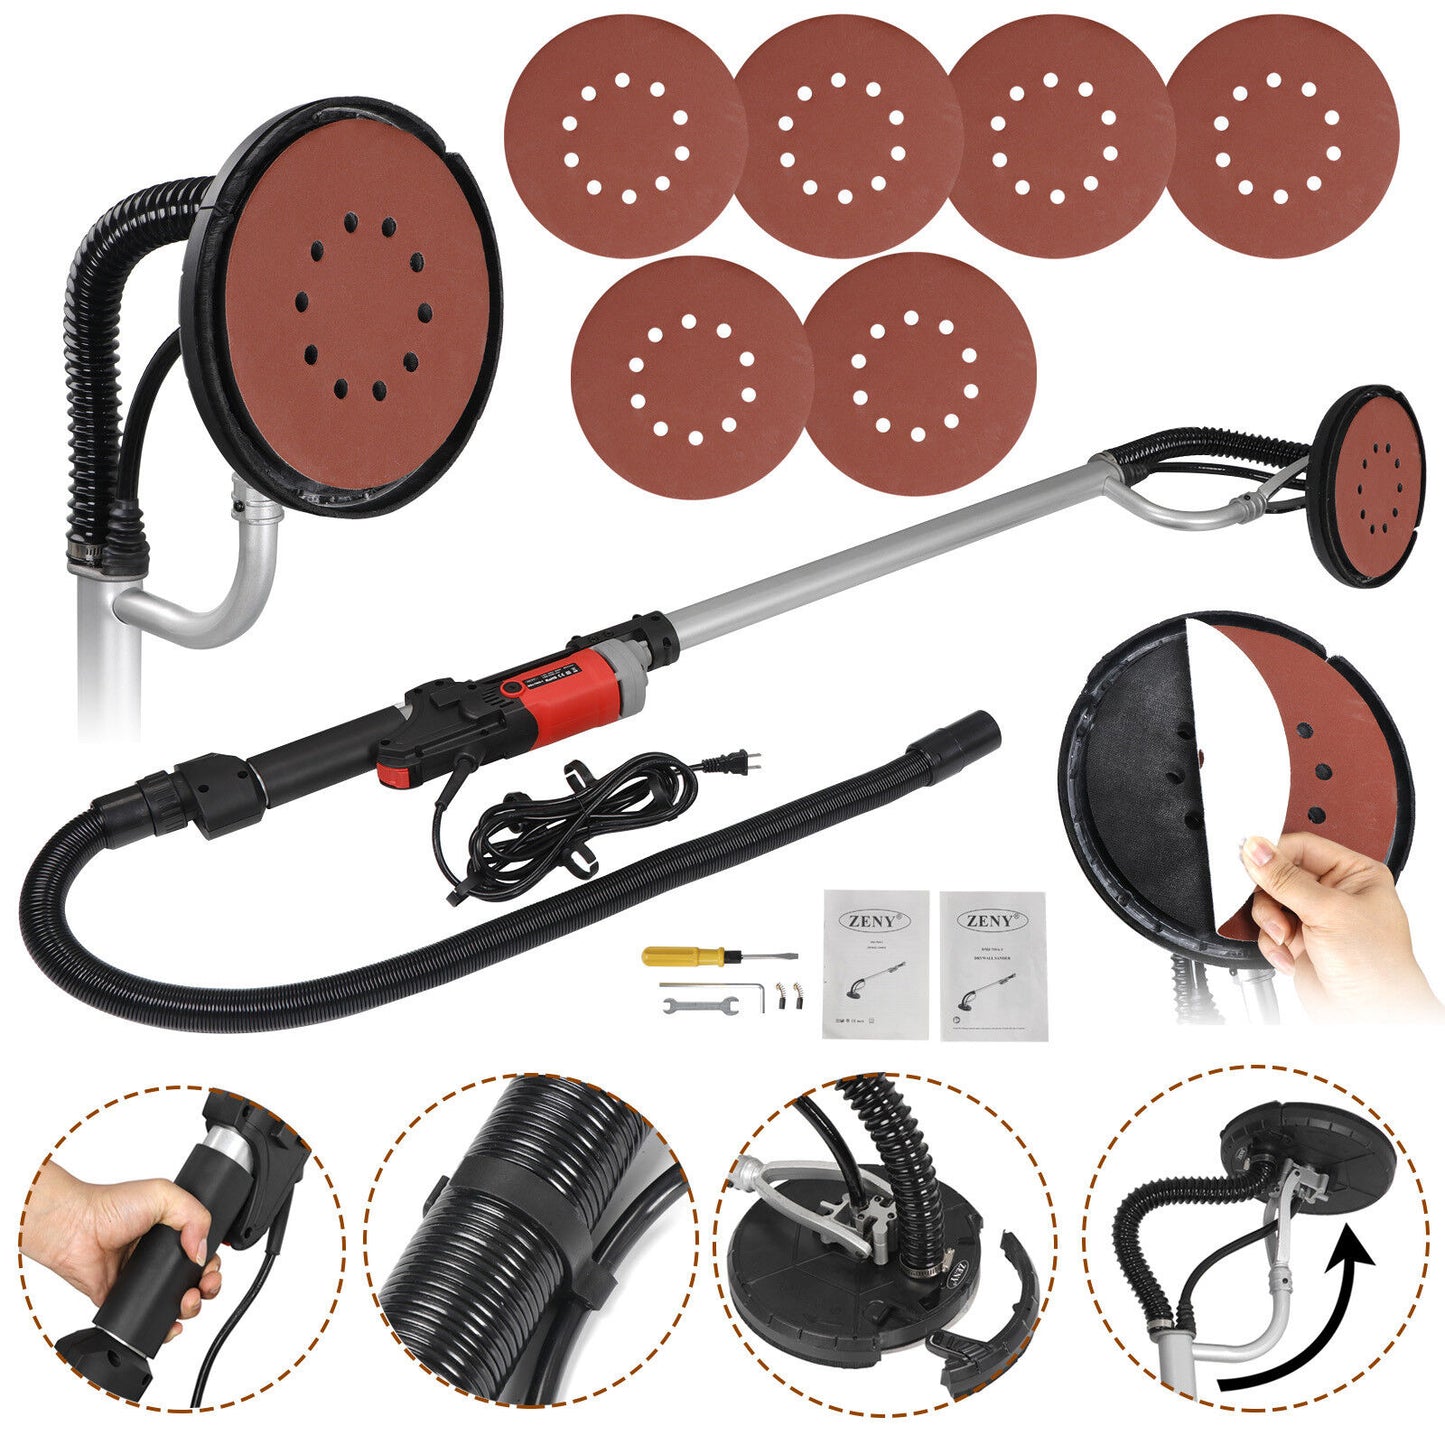 Drywall Sander 800 Watts Commercial Electric Variable Speed Free Sanding Pad New